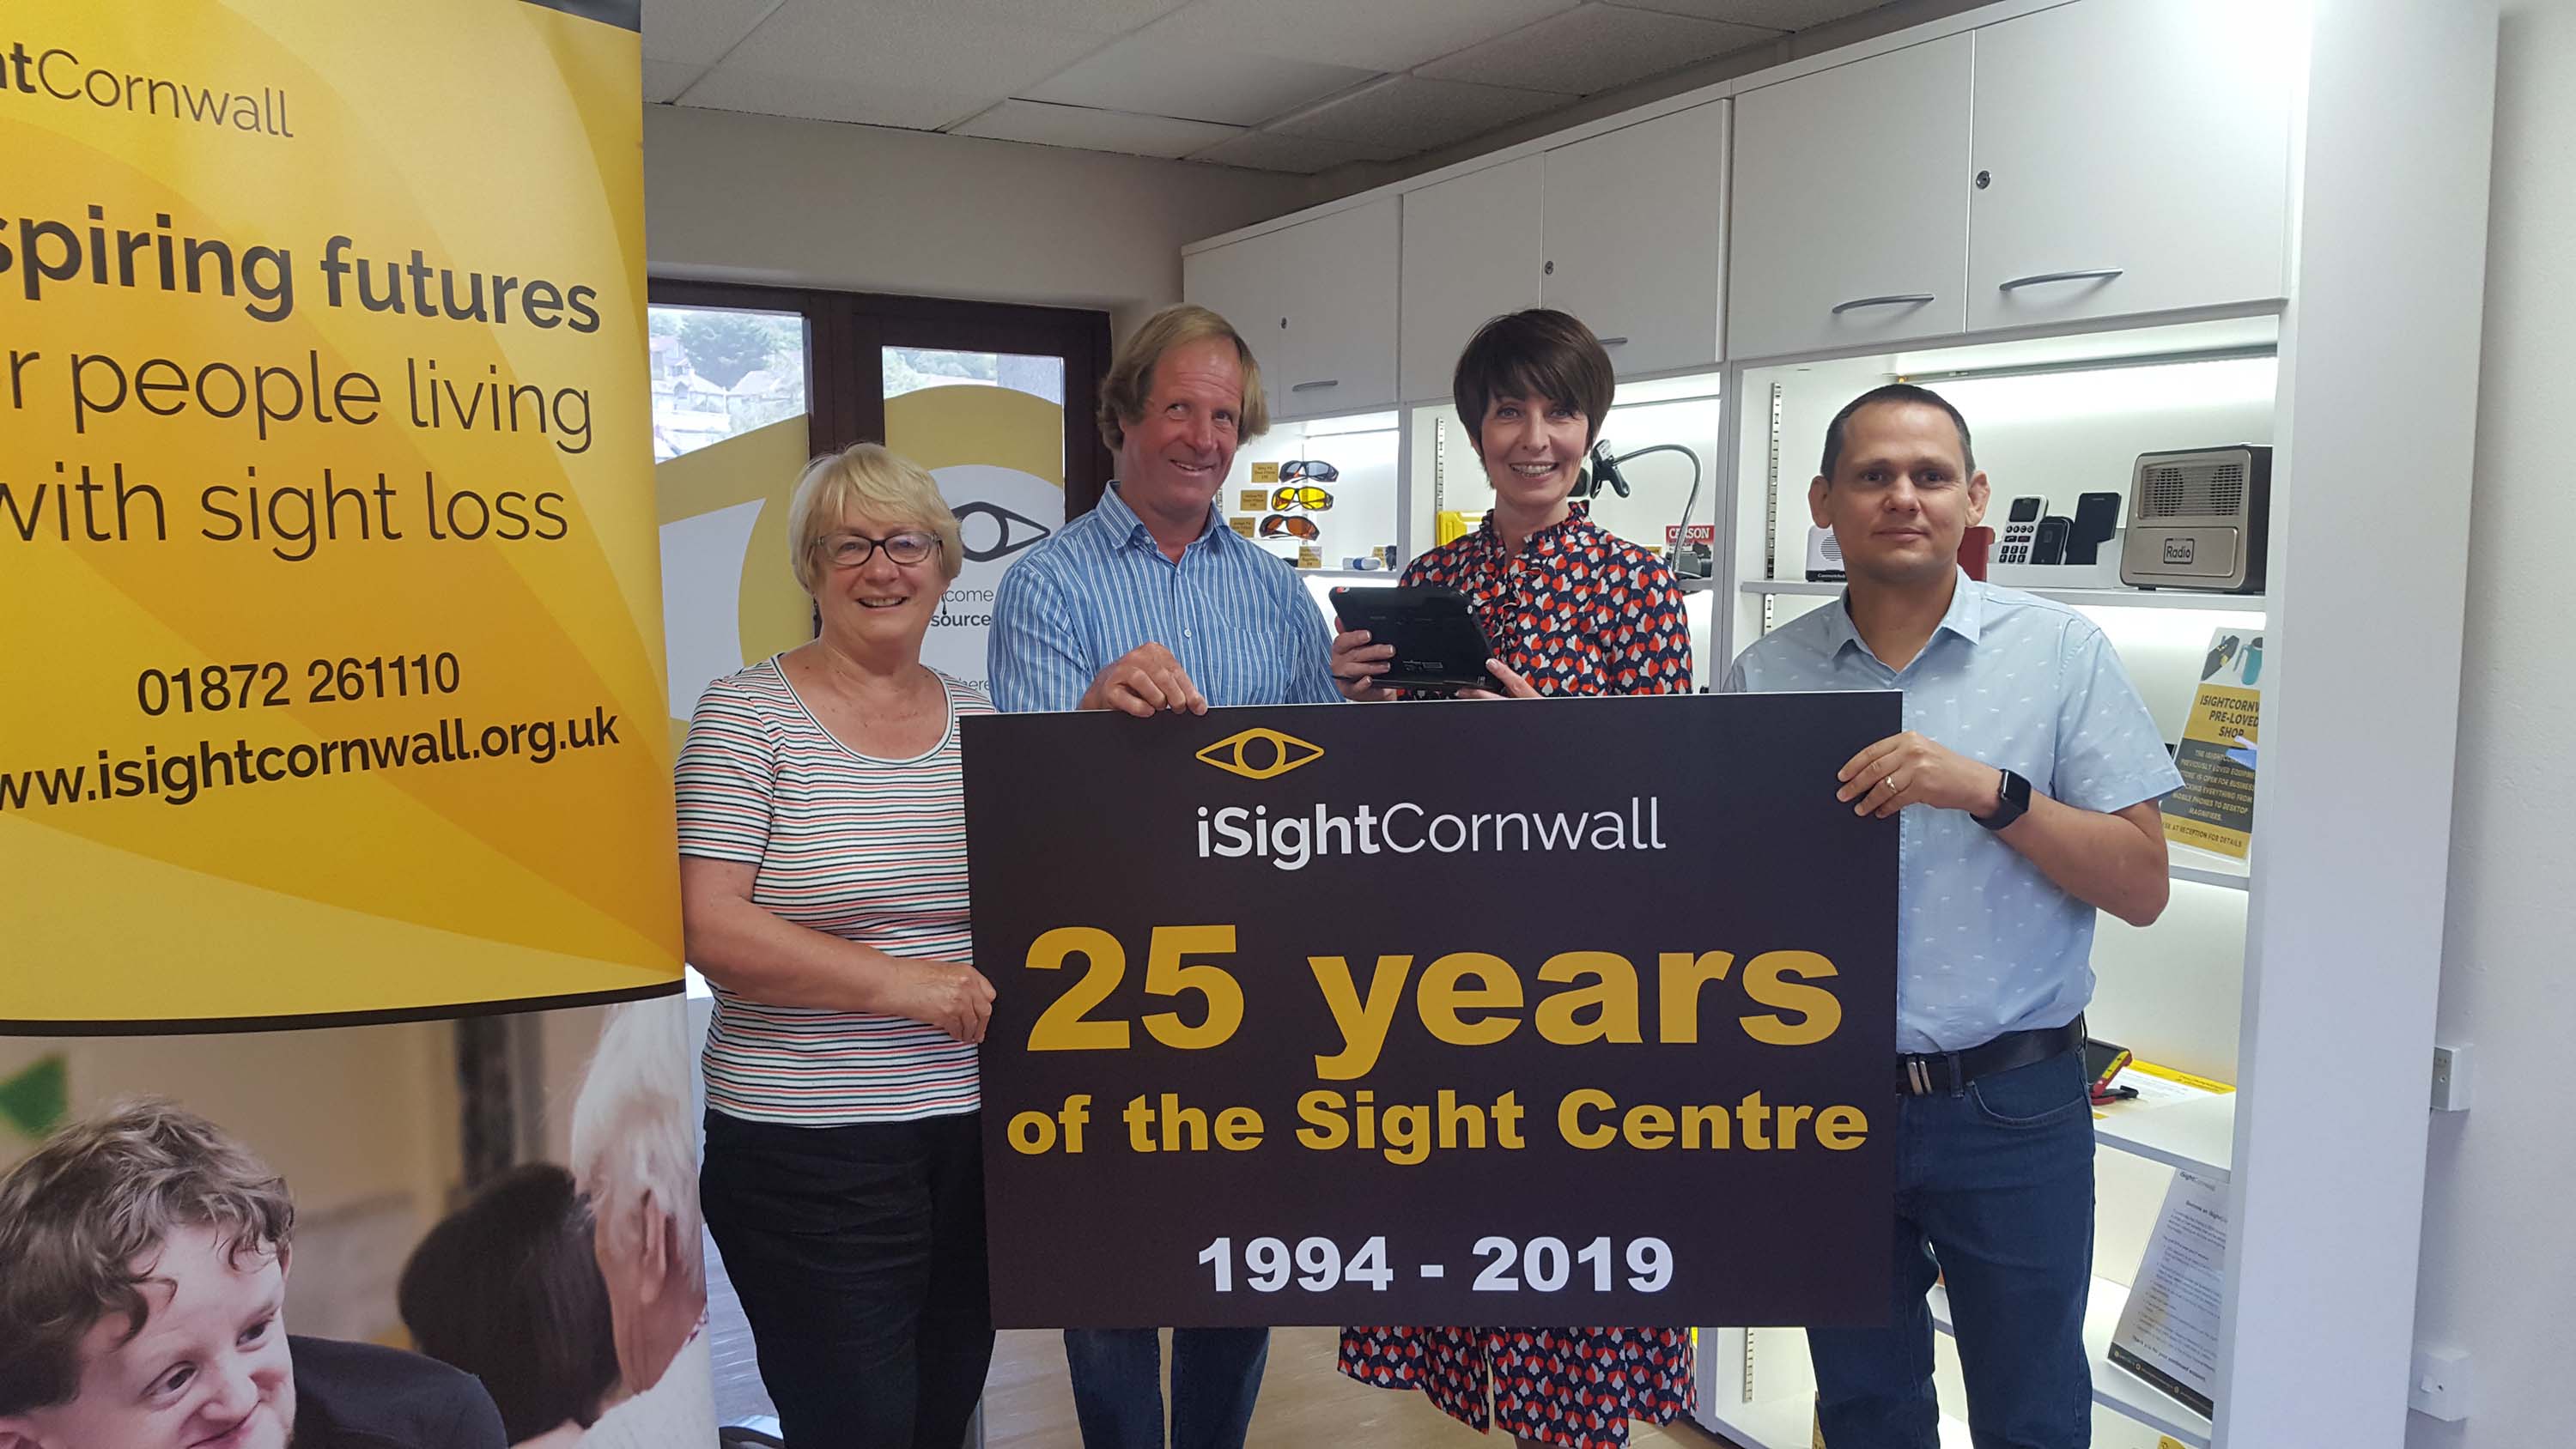 25 years of the iSightCornwall Sight Centre